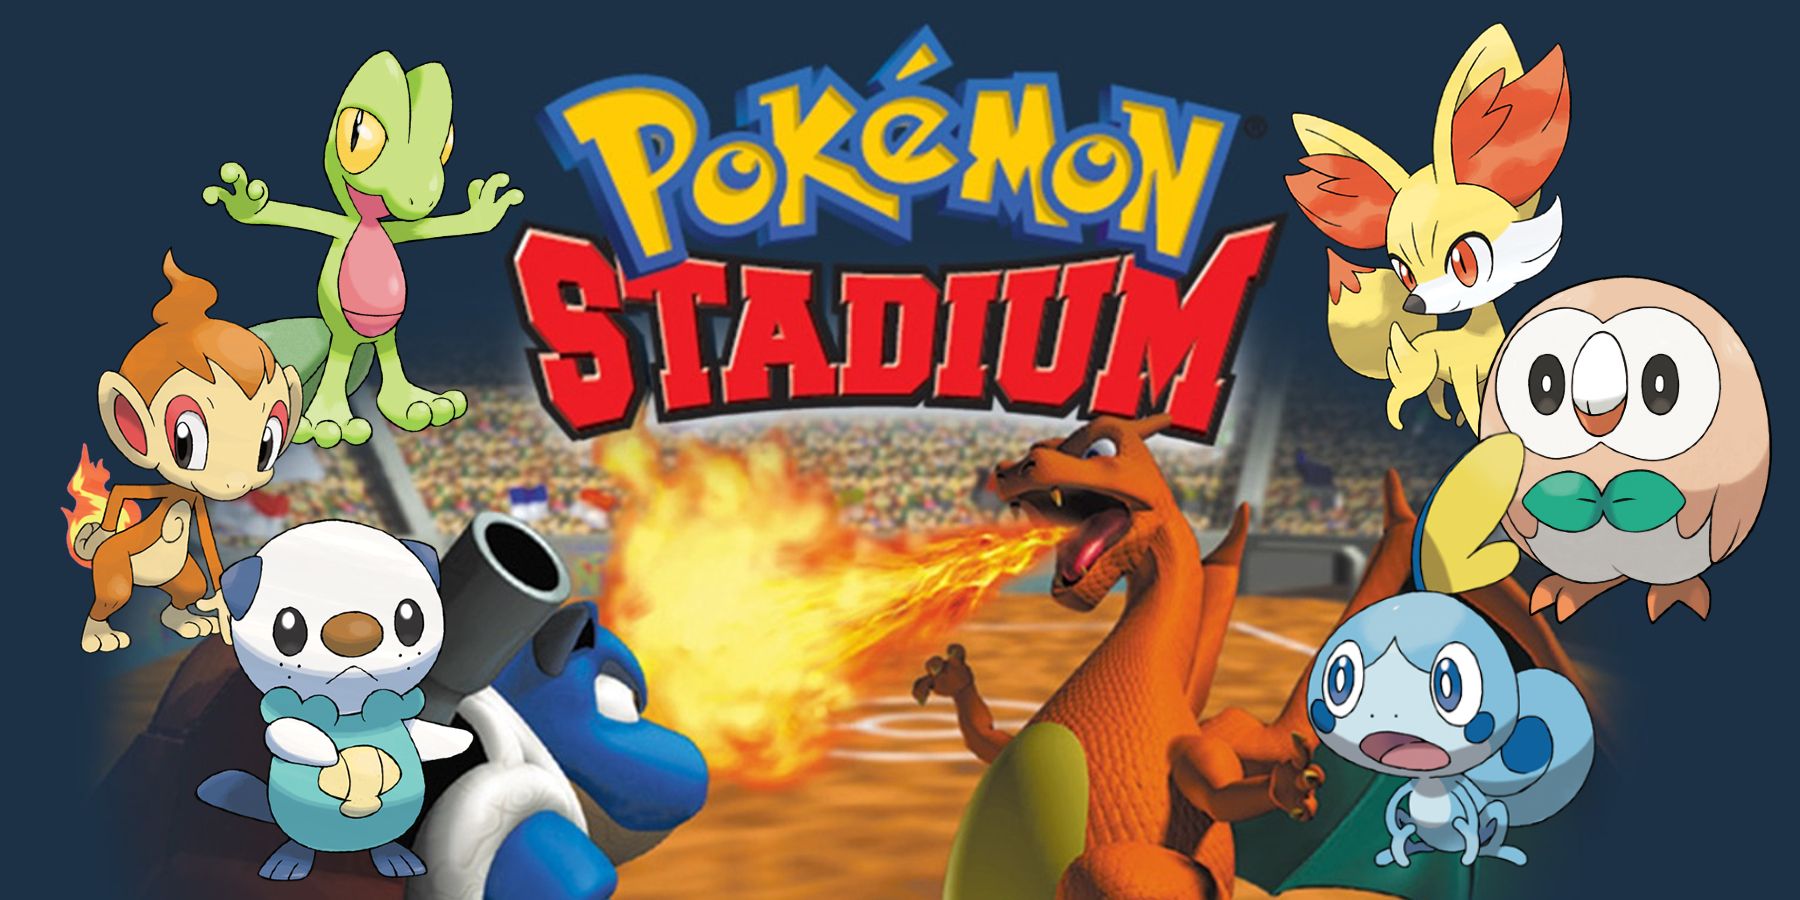 New Pokemon Stadium Games Would Have A Lot to Work With